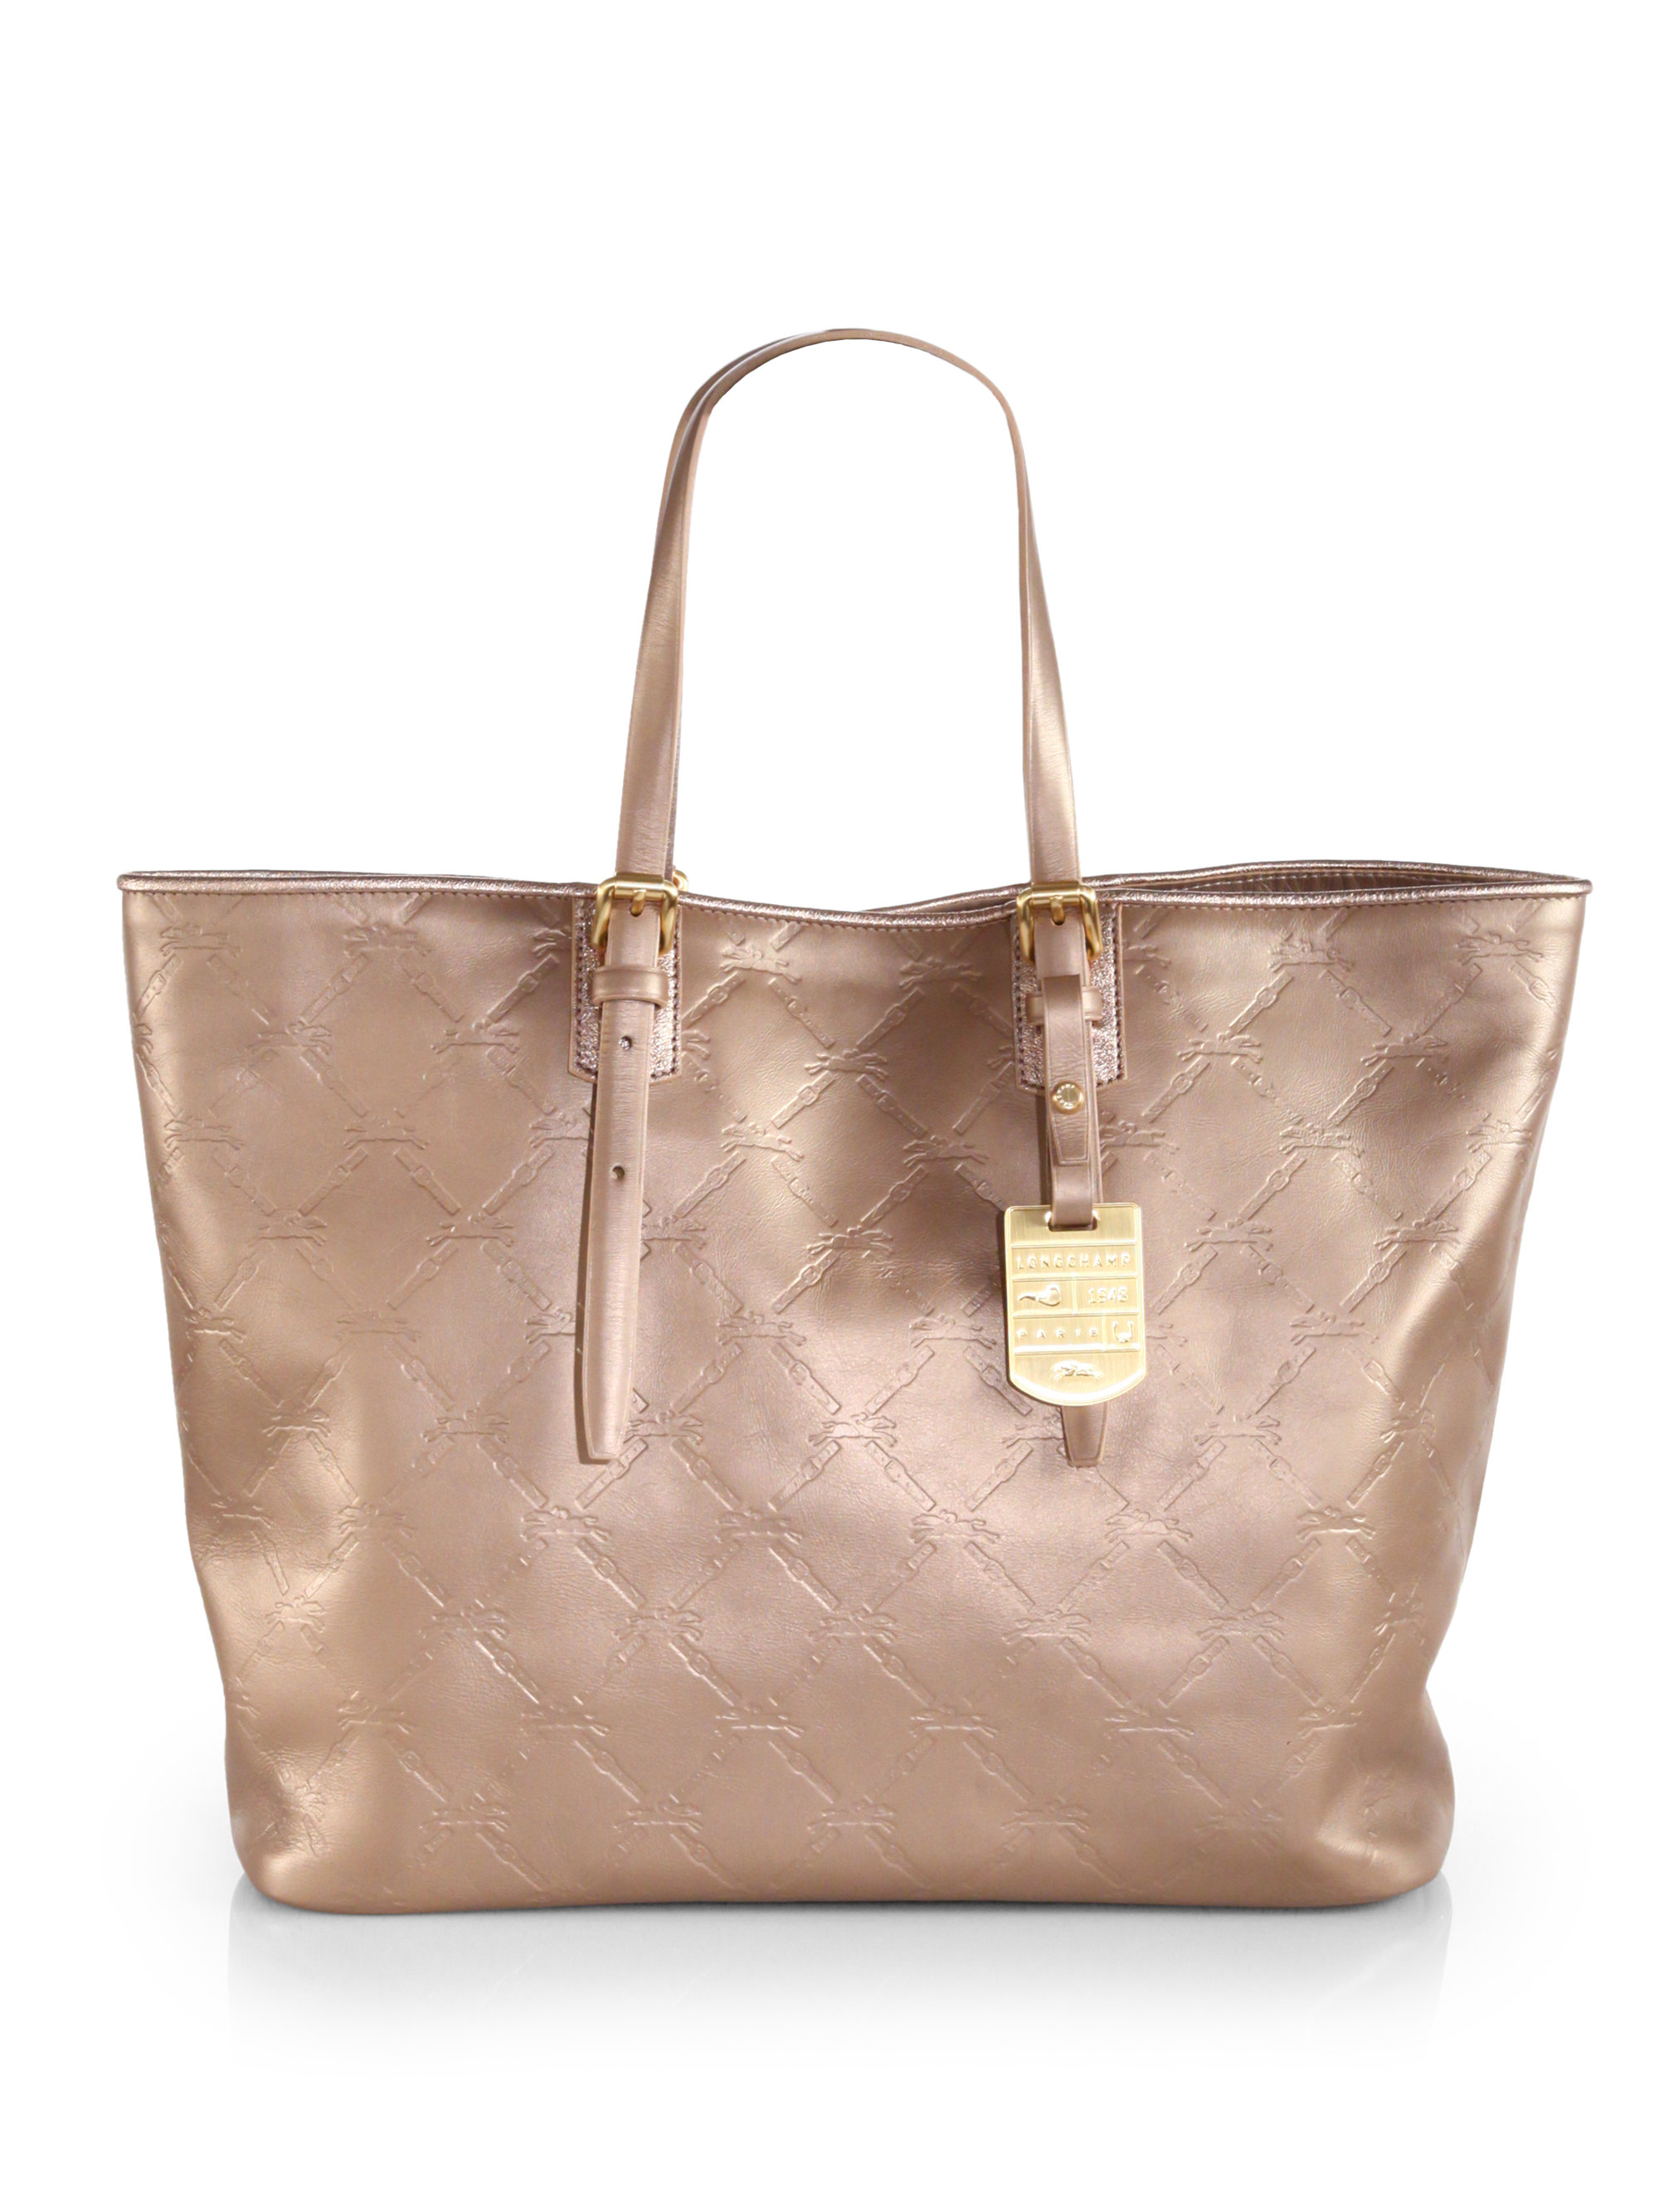 longchamp lm cuir leather tote